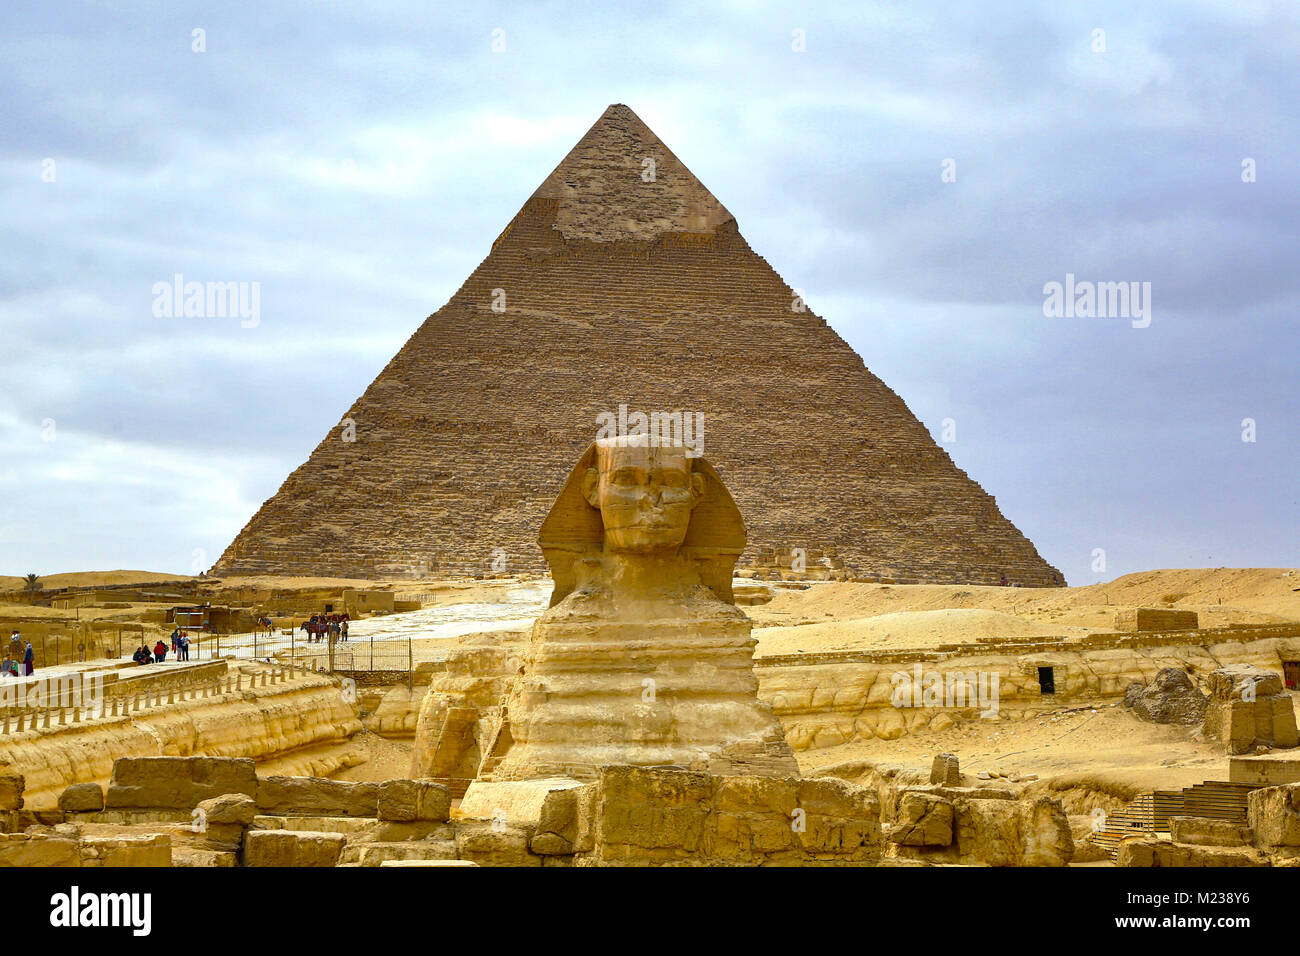 The Great Sphinx statue and the Pyramid of Khafre on the Giza Plateau, Cairo, Egypt Stock Photo